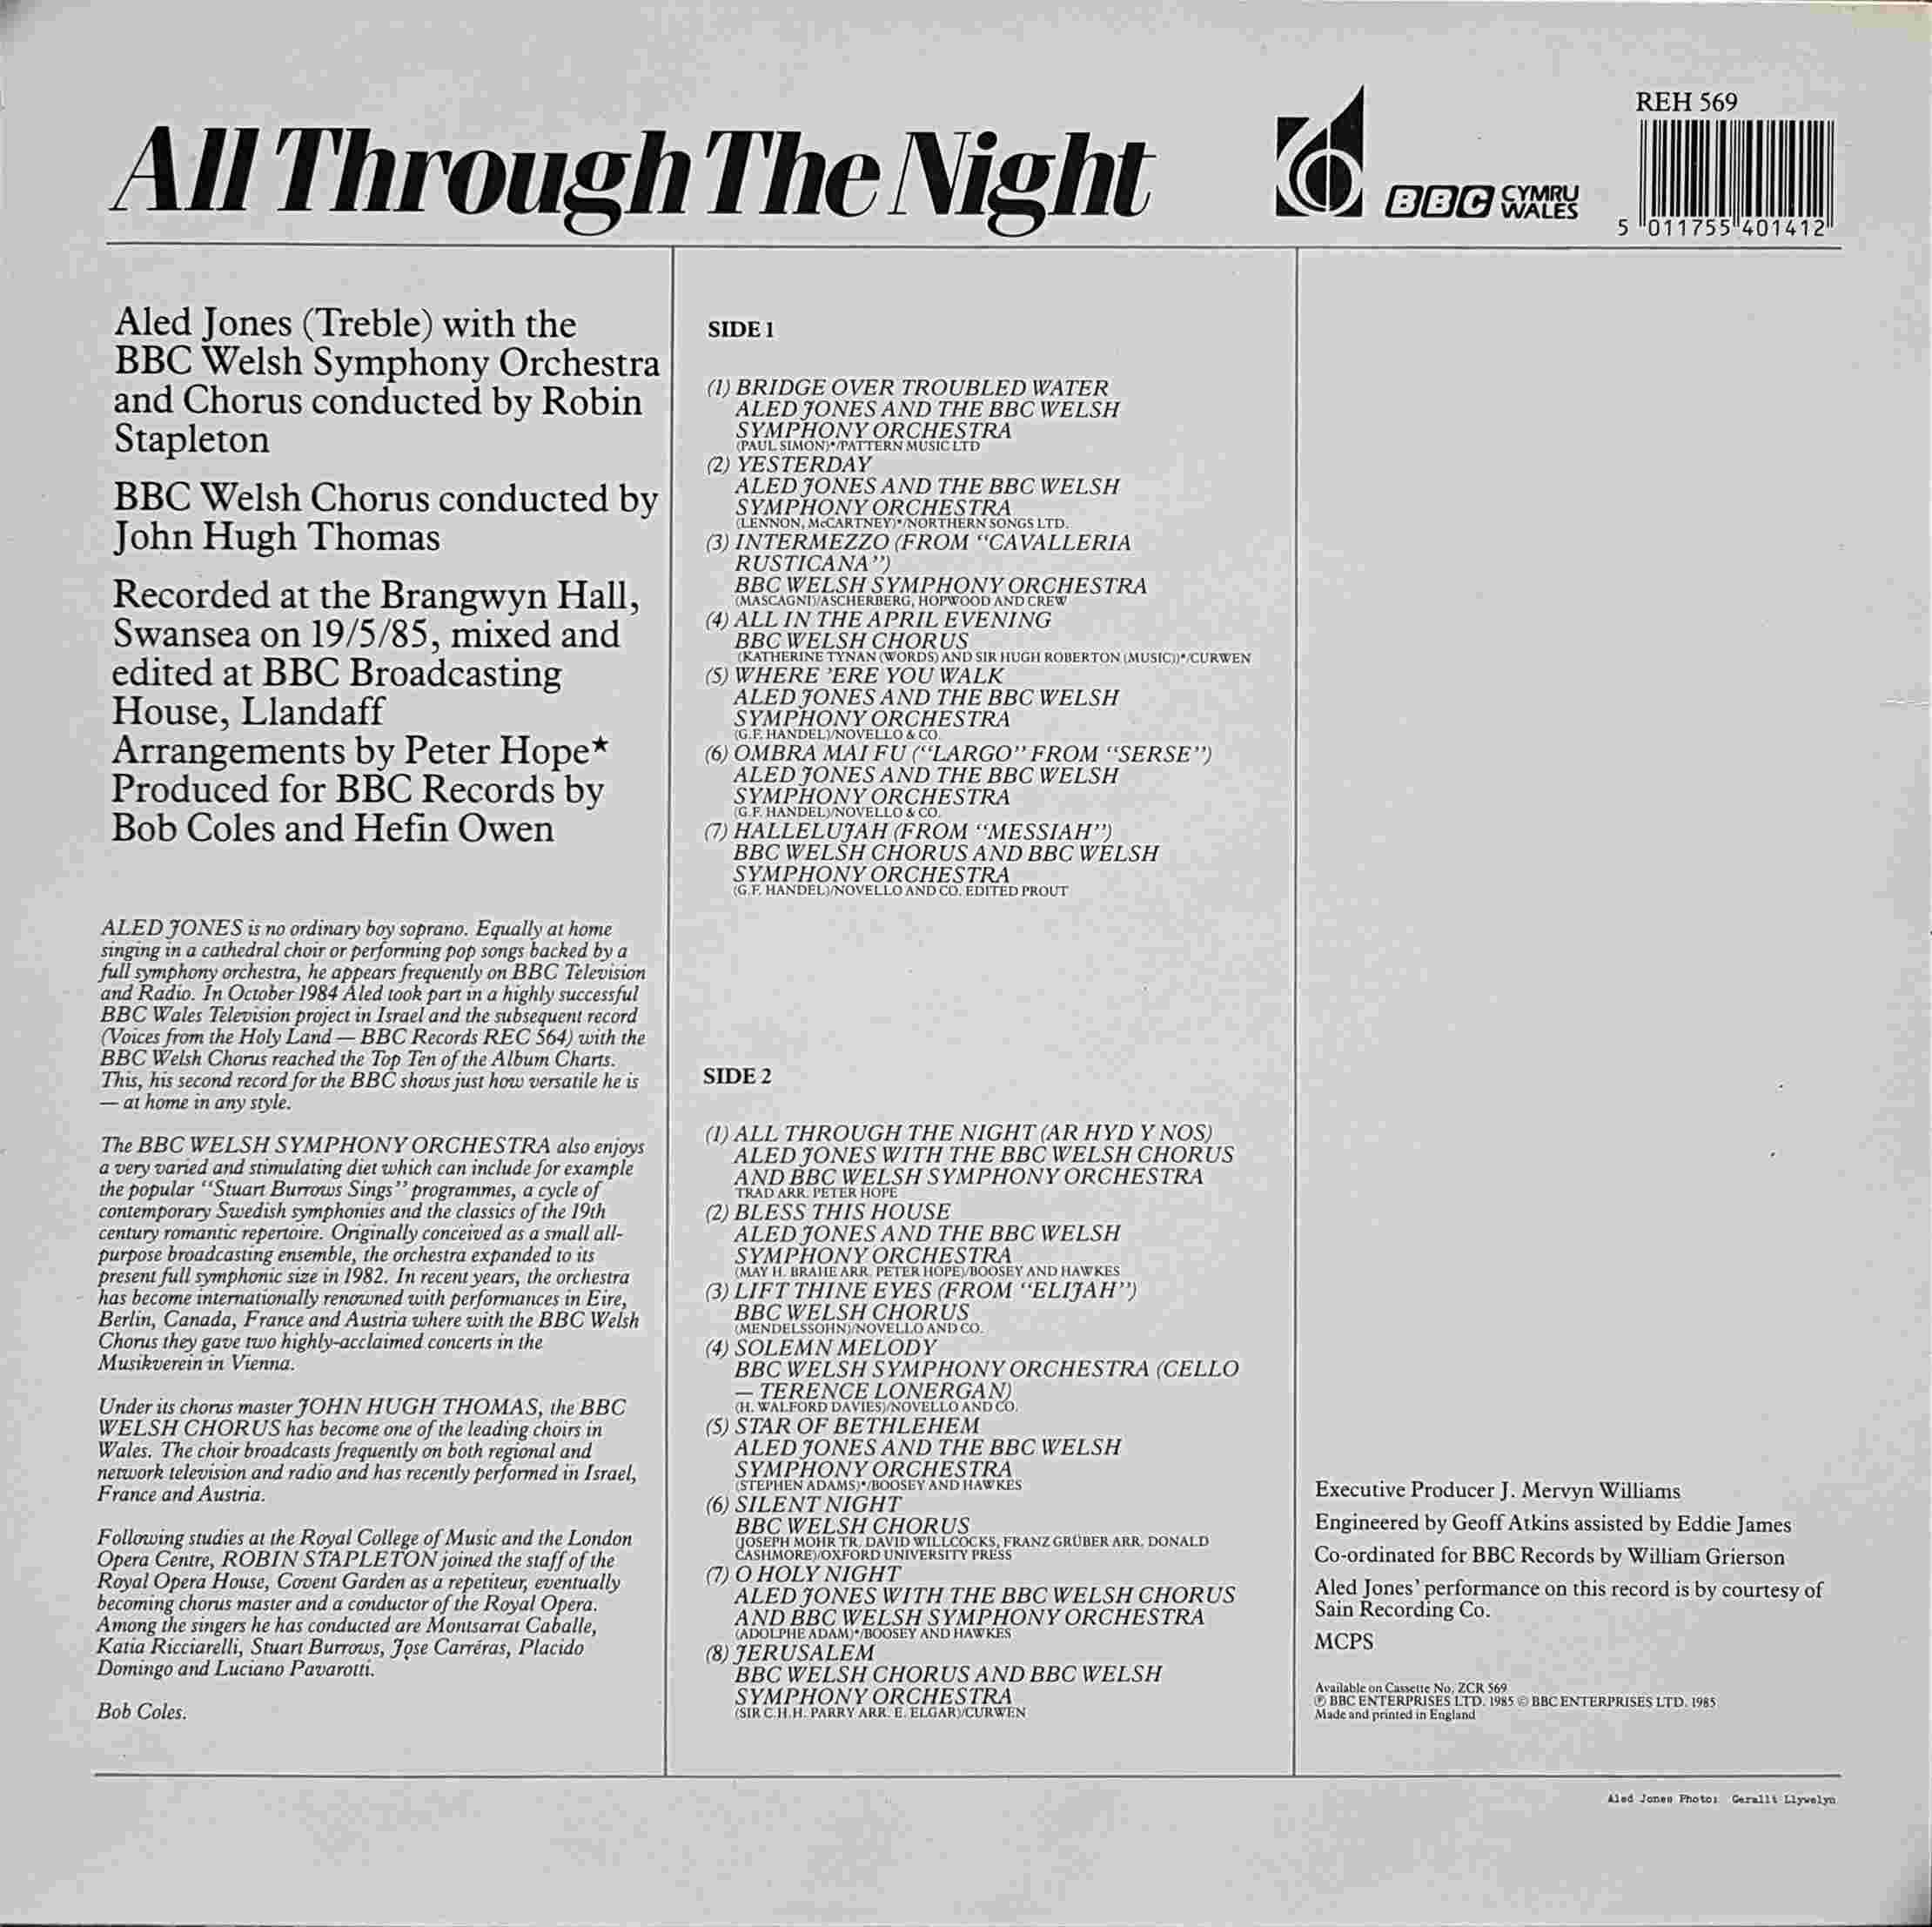 Picture of REH 569 All through the night by artist Various from the BBC records and Tapes library